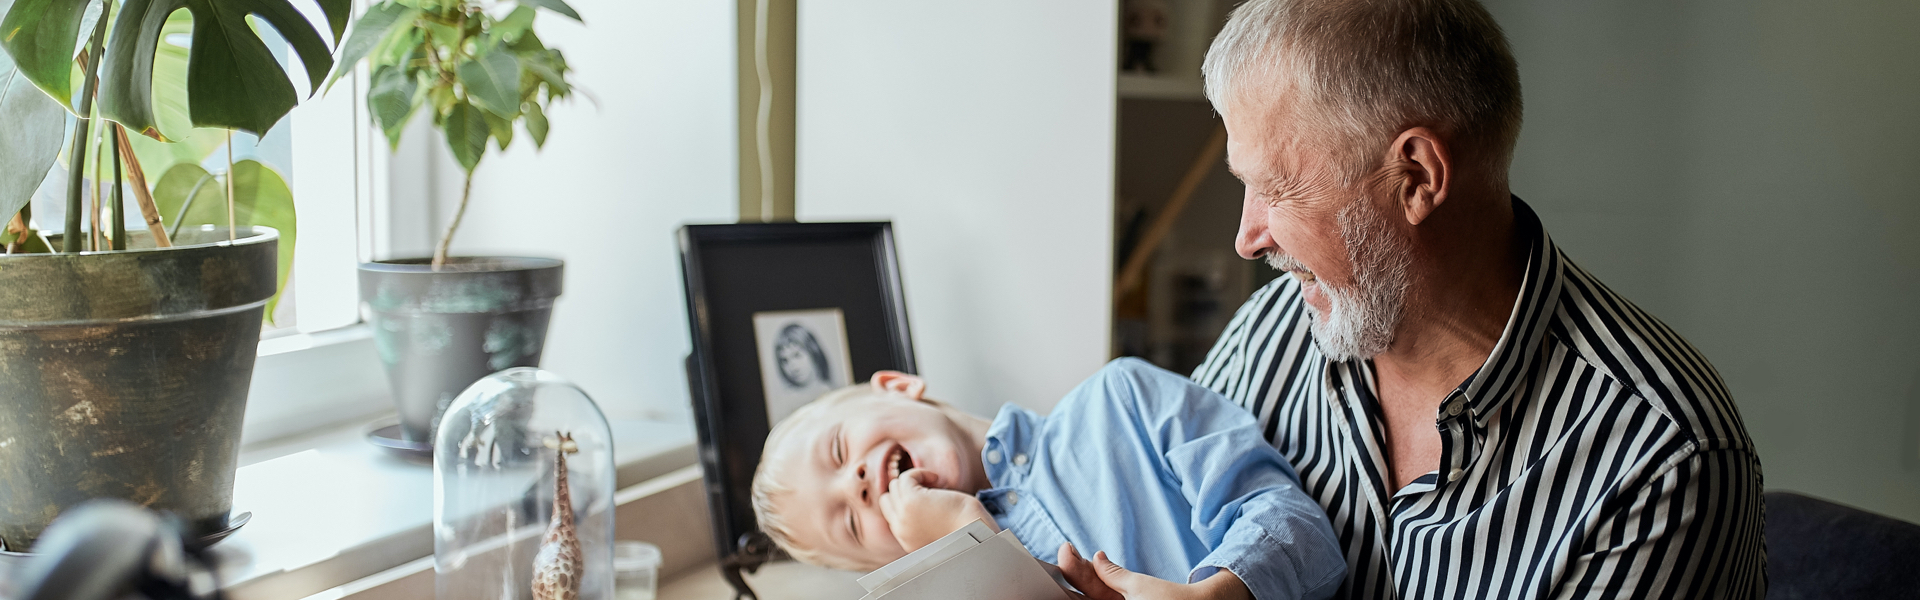 An older man is holding a laughing child.